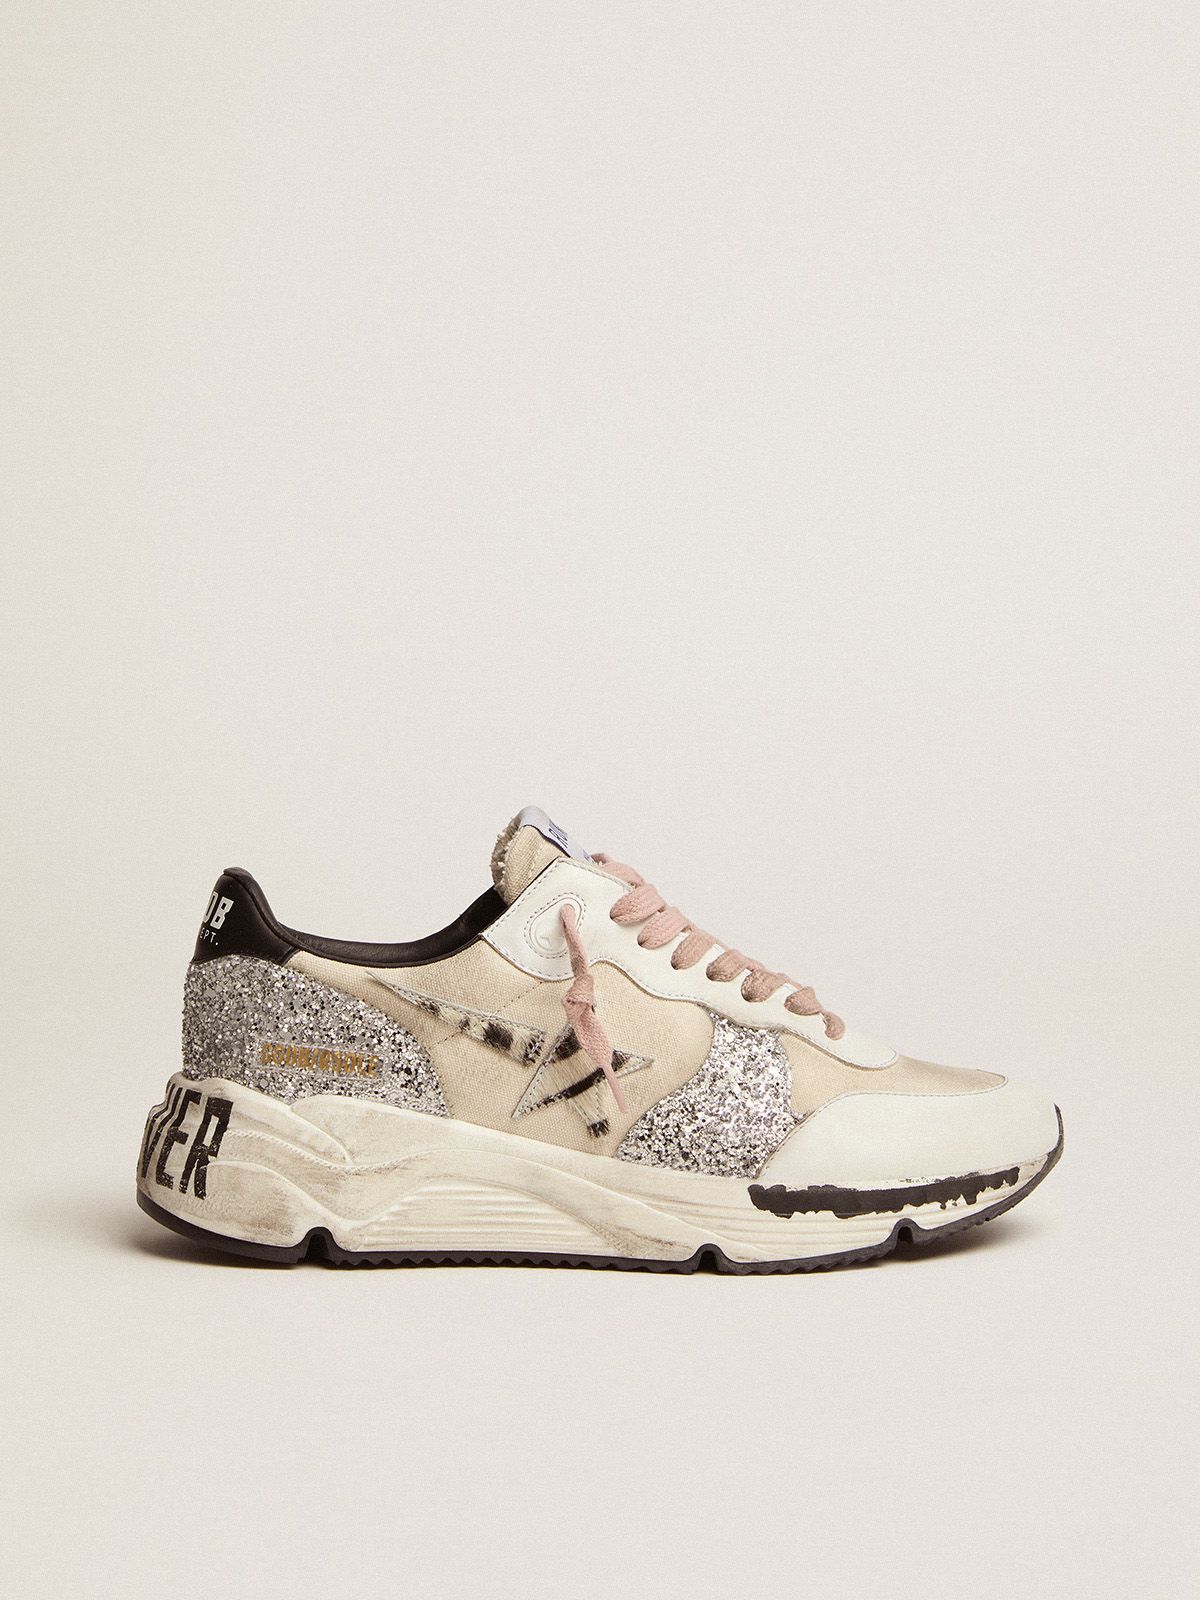 golden goose pony with and skin upper cream Sole zebra-print Running canvas sneakers star